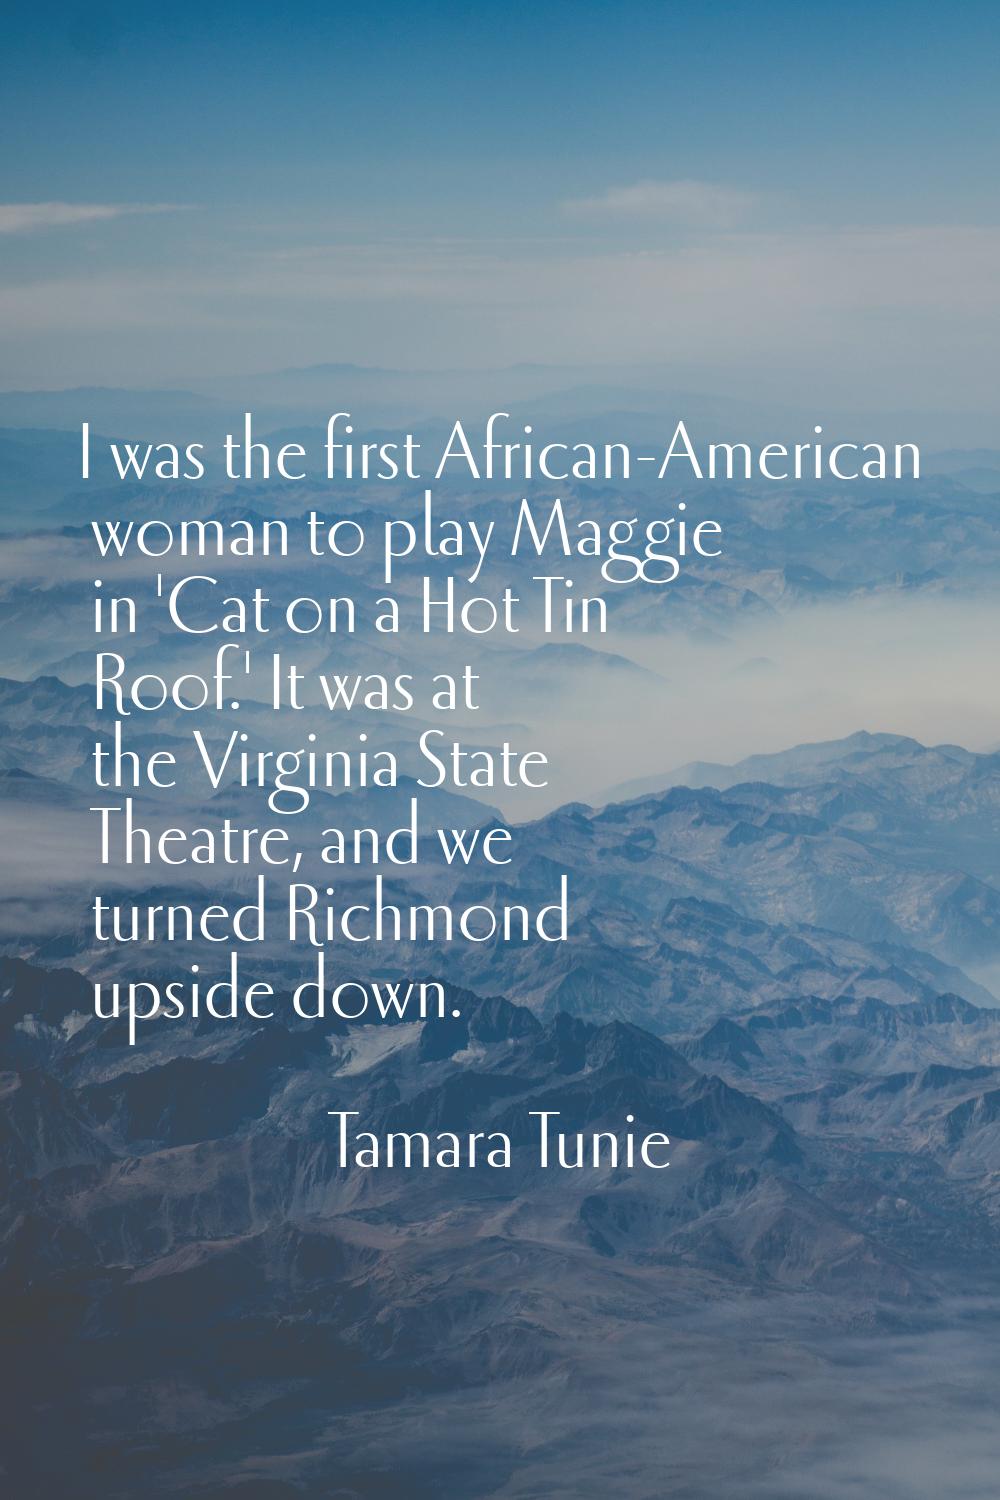 I was the first African-American woman to play Maggie in 'Cat on a Hot Tin Roof.' It was at the Vir